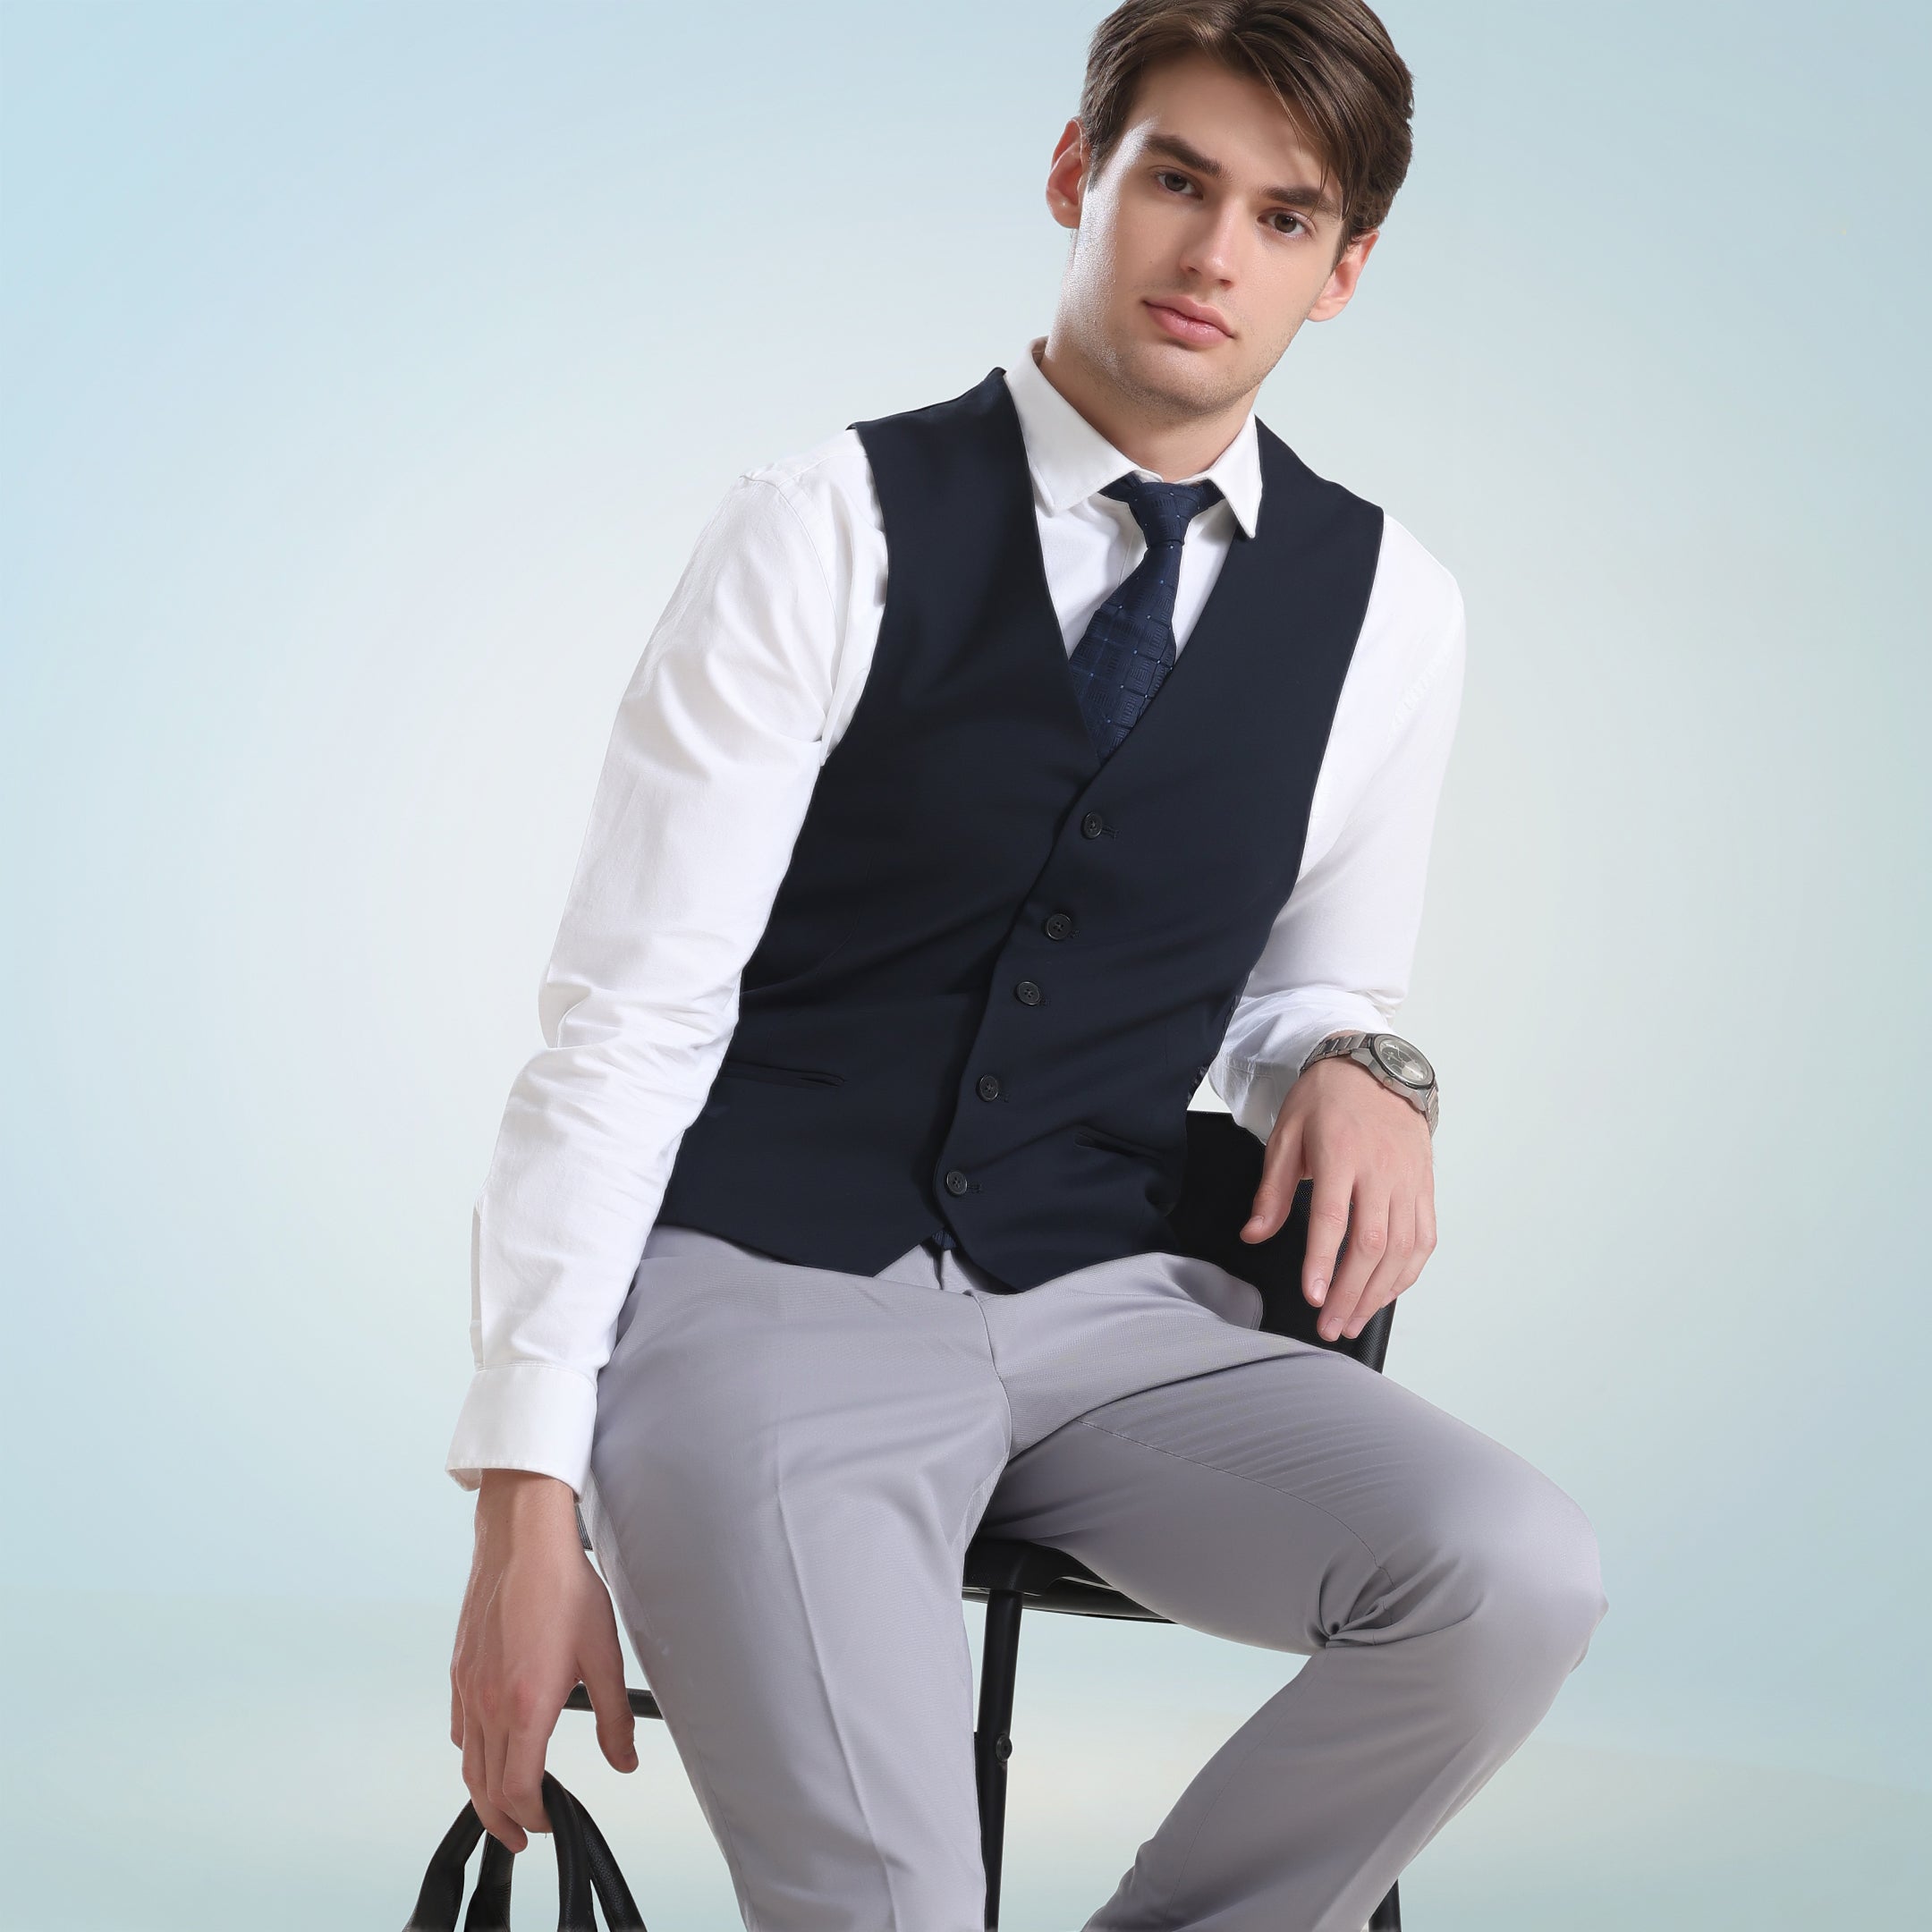 Stylish man wearing Oxford Turms white shirt with black vest and grey pants, showcasing premium luxury menswear for formal occasions.